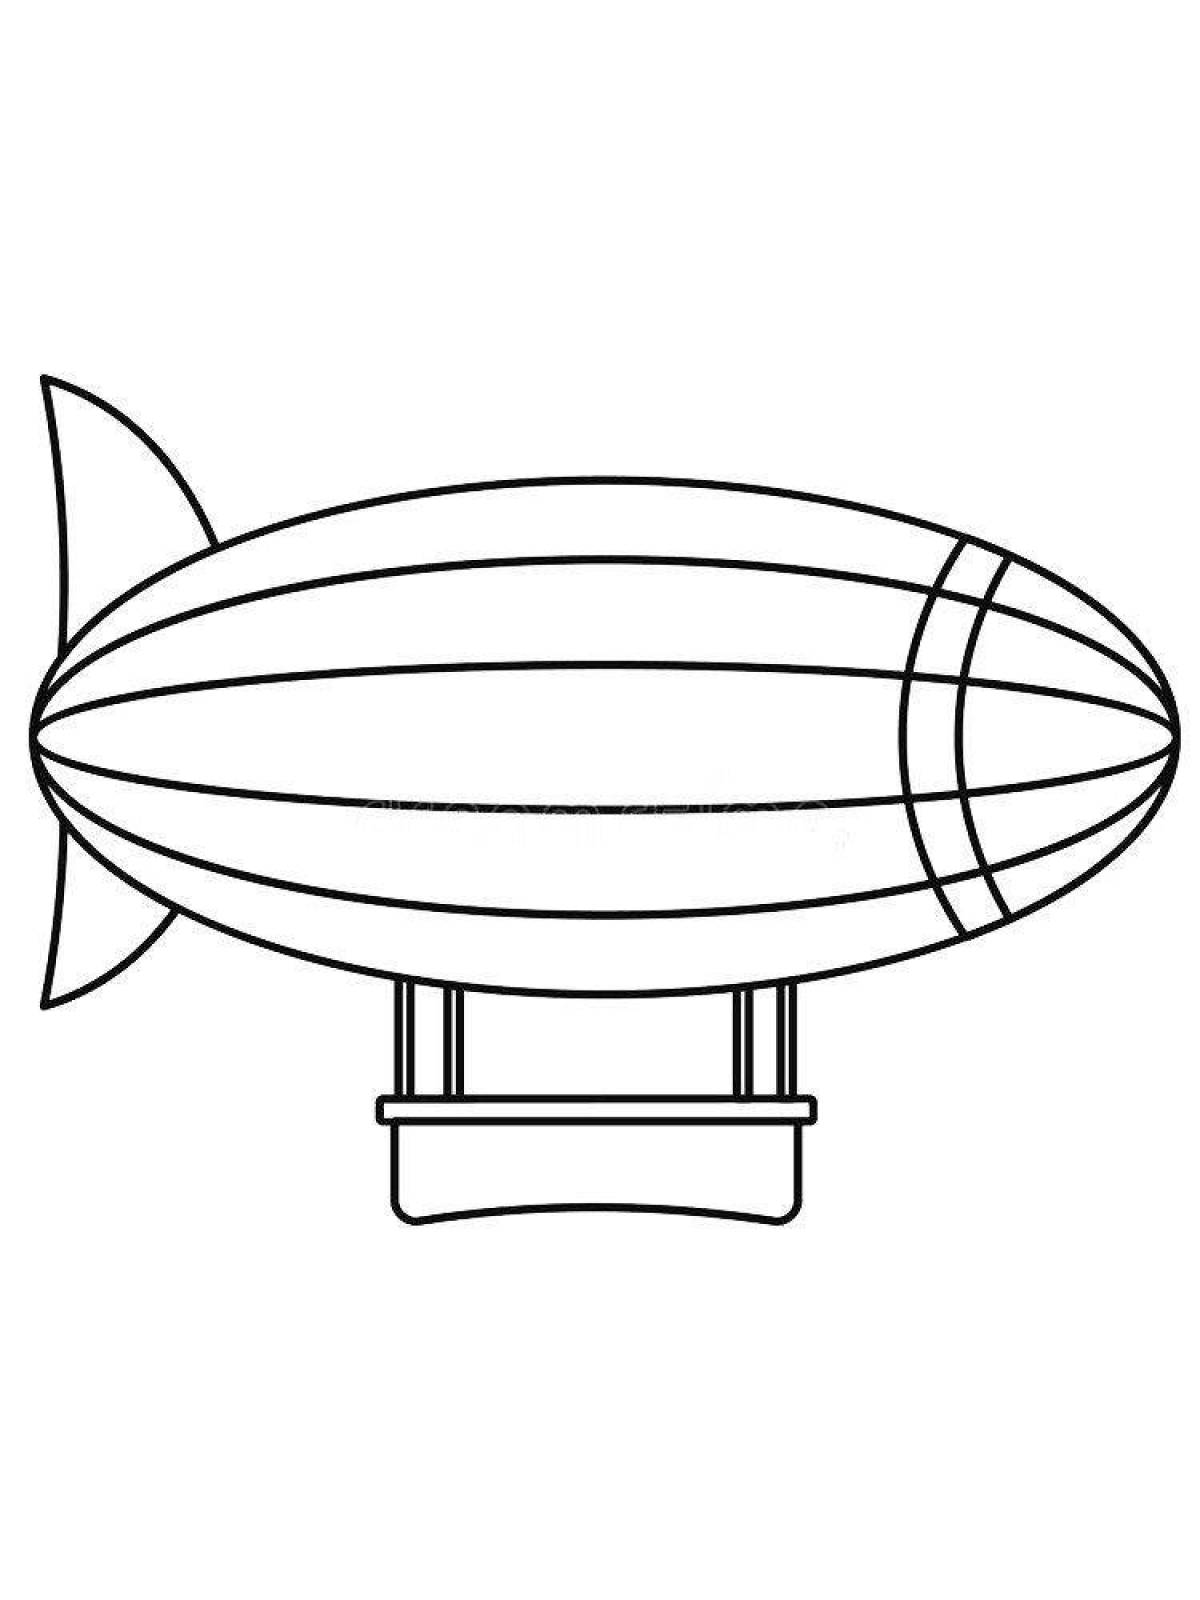 Awesome airship coloring page